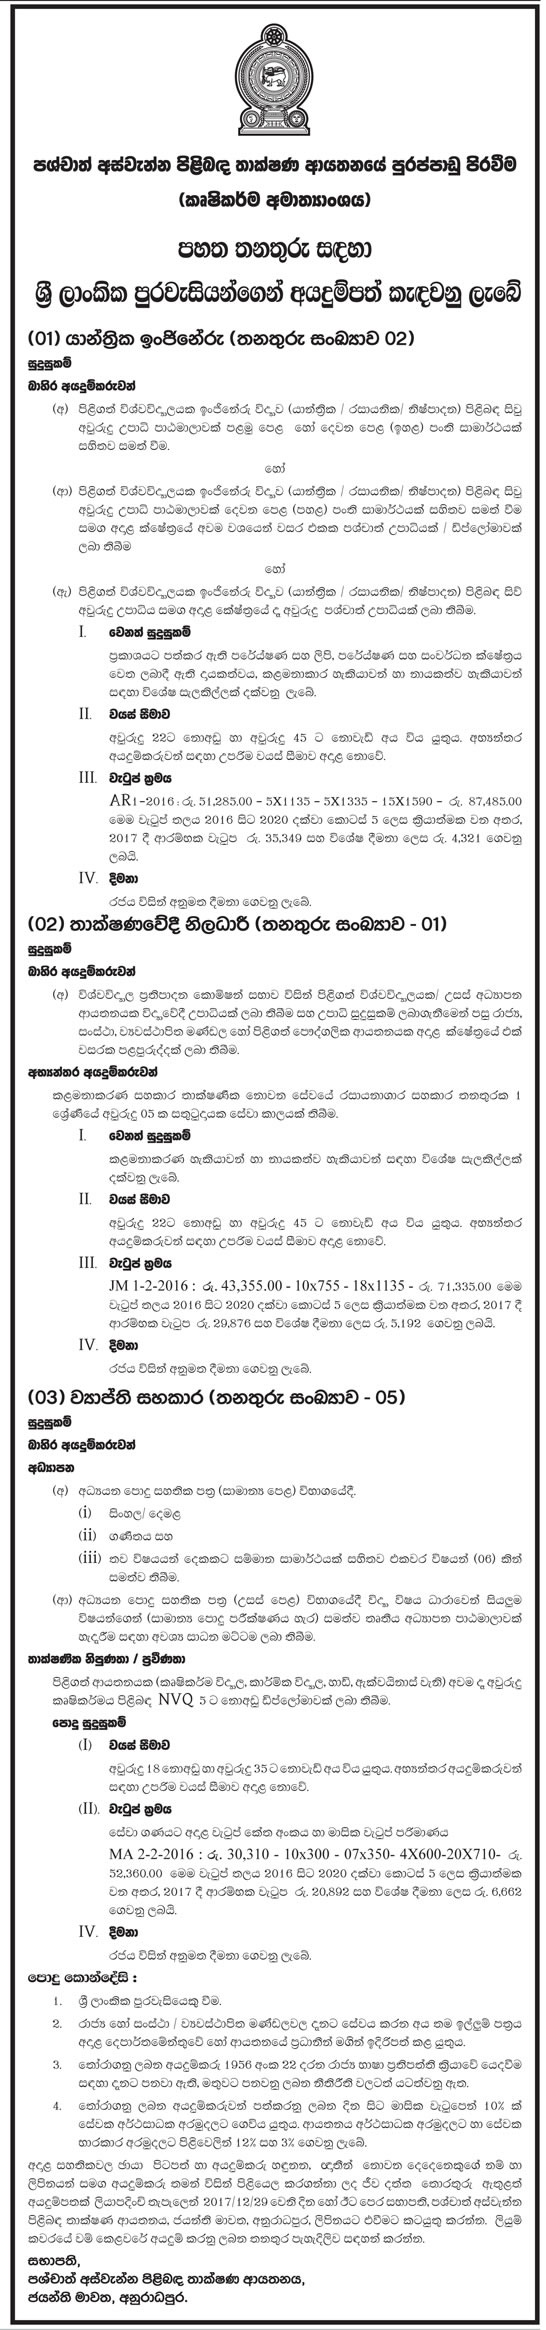 Mechanical Engineer / Technical Officer / Extension Assistant - Ministry of Agriculture